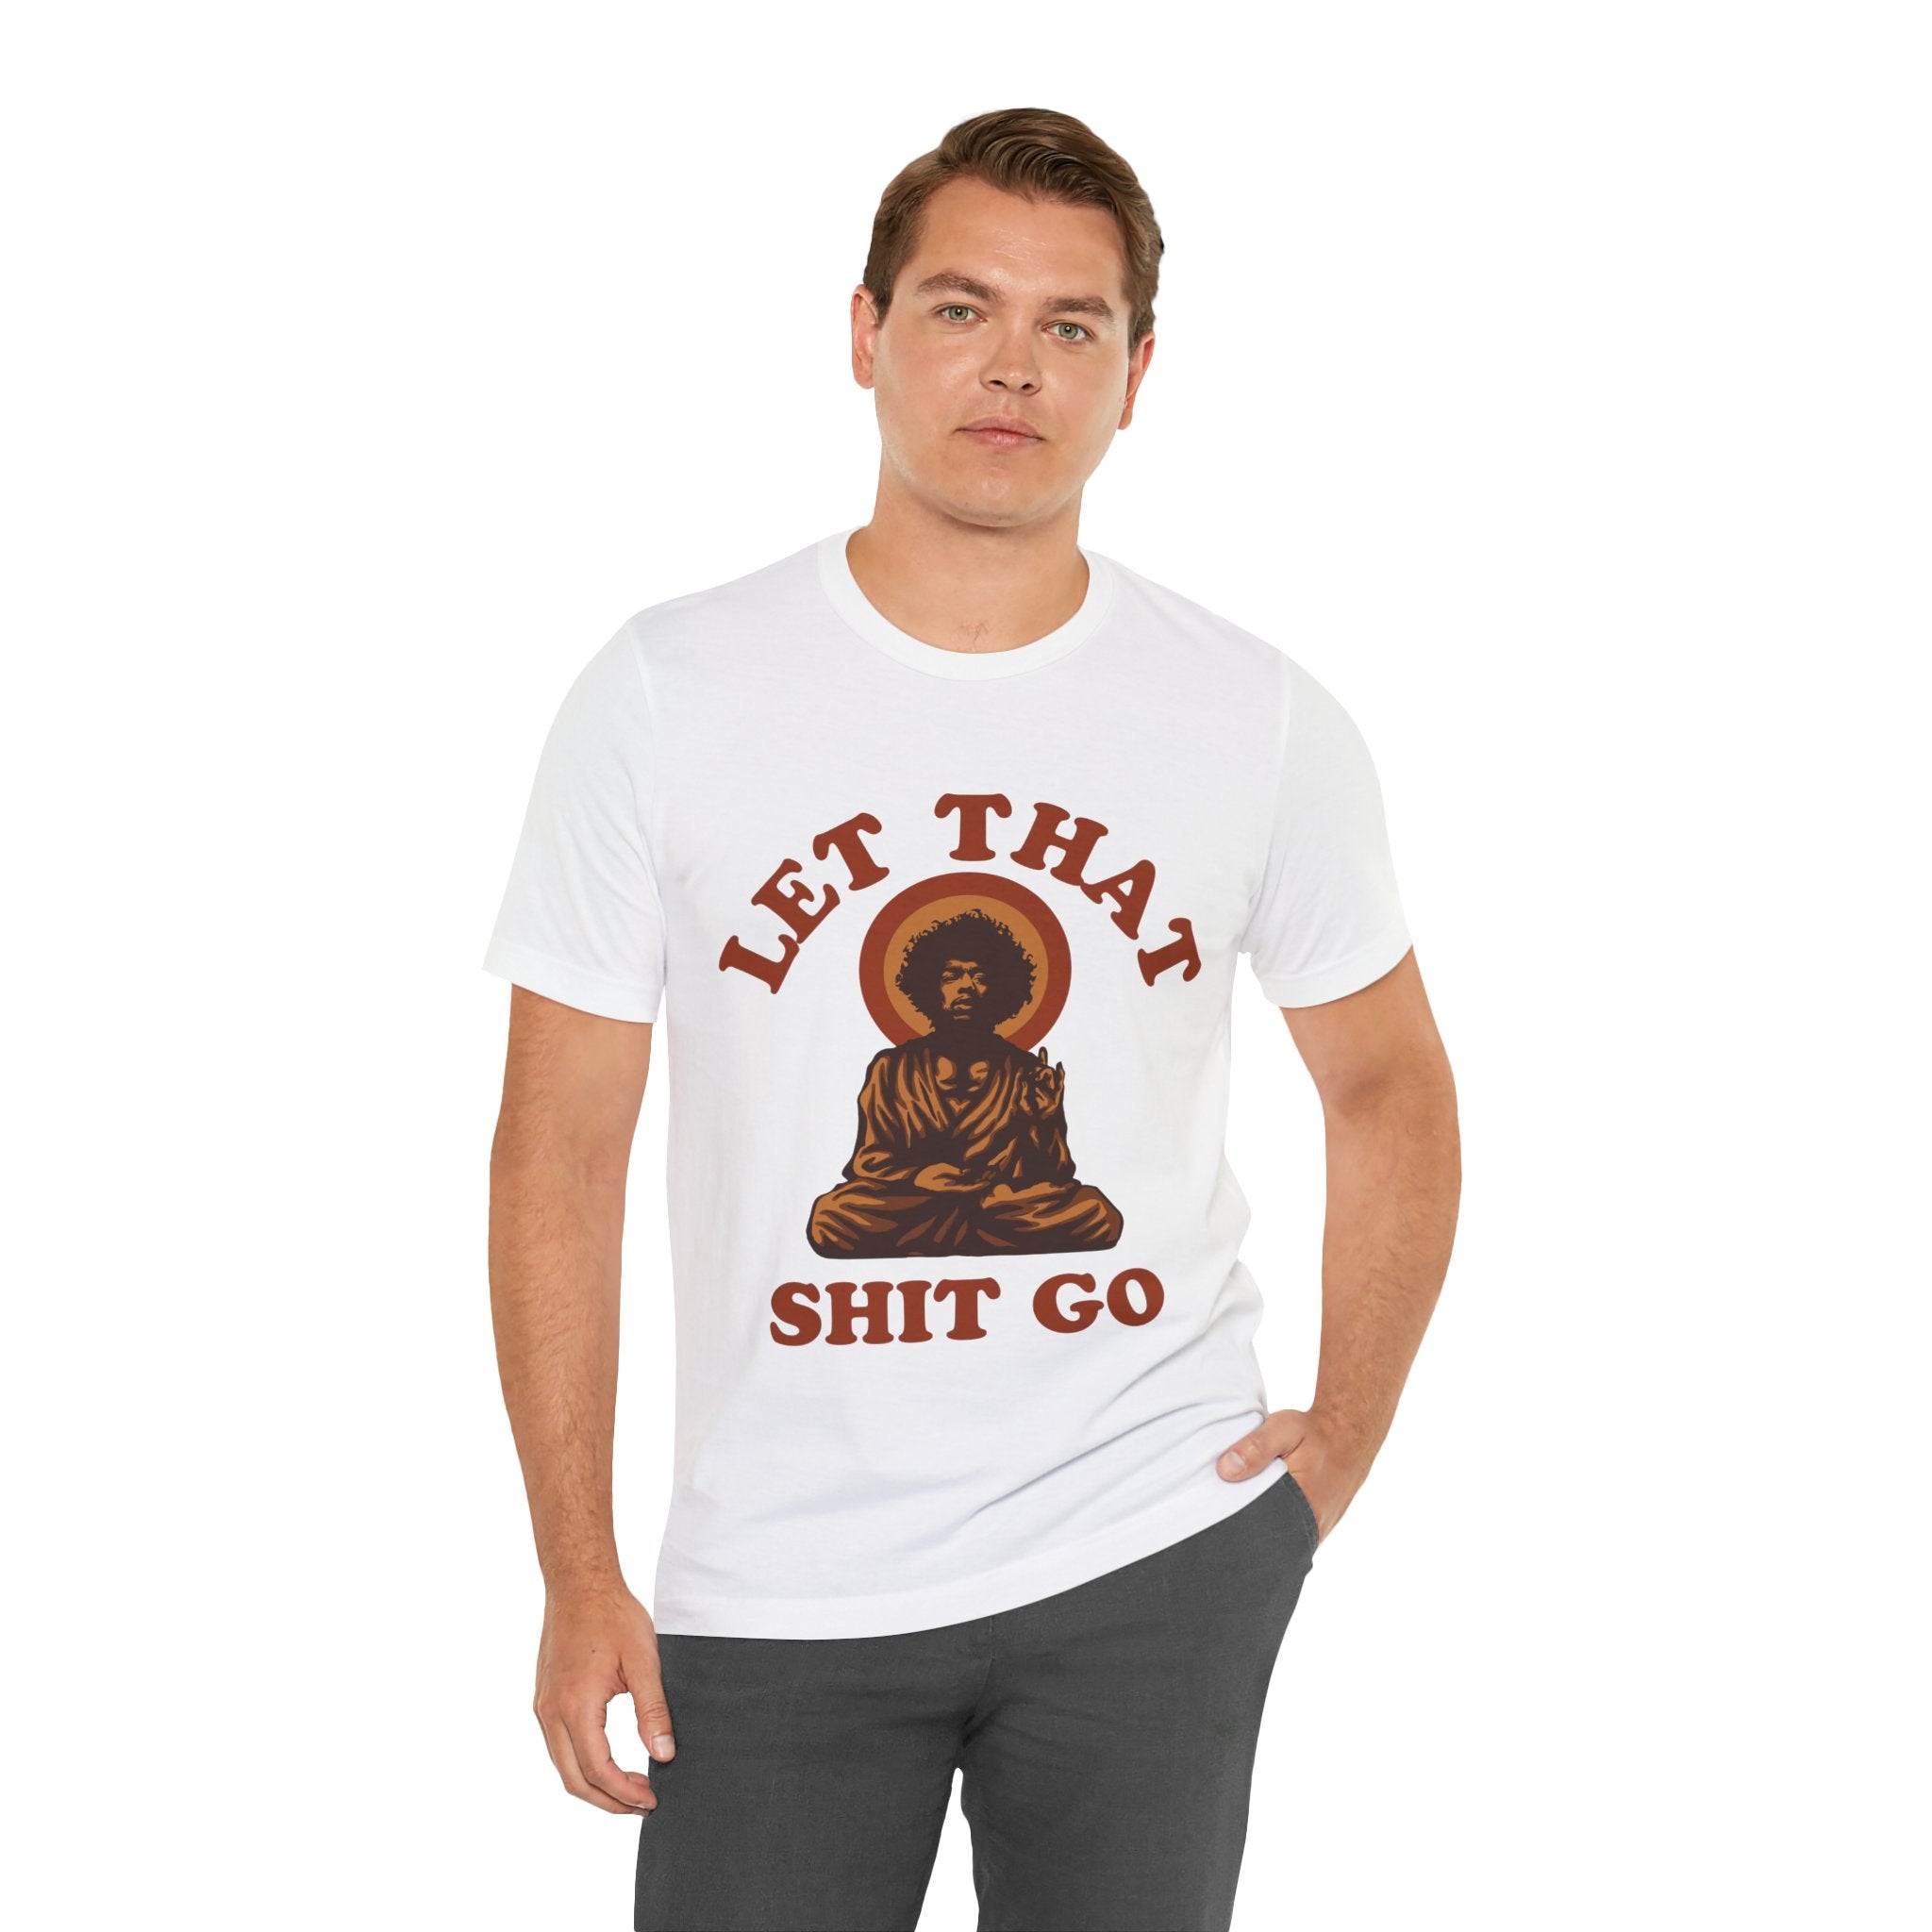 Man wearing a white Let That Shit Go T-Shirt with a Buddha graphic, standing against a plain background.